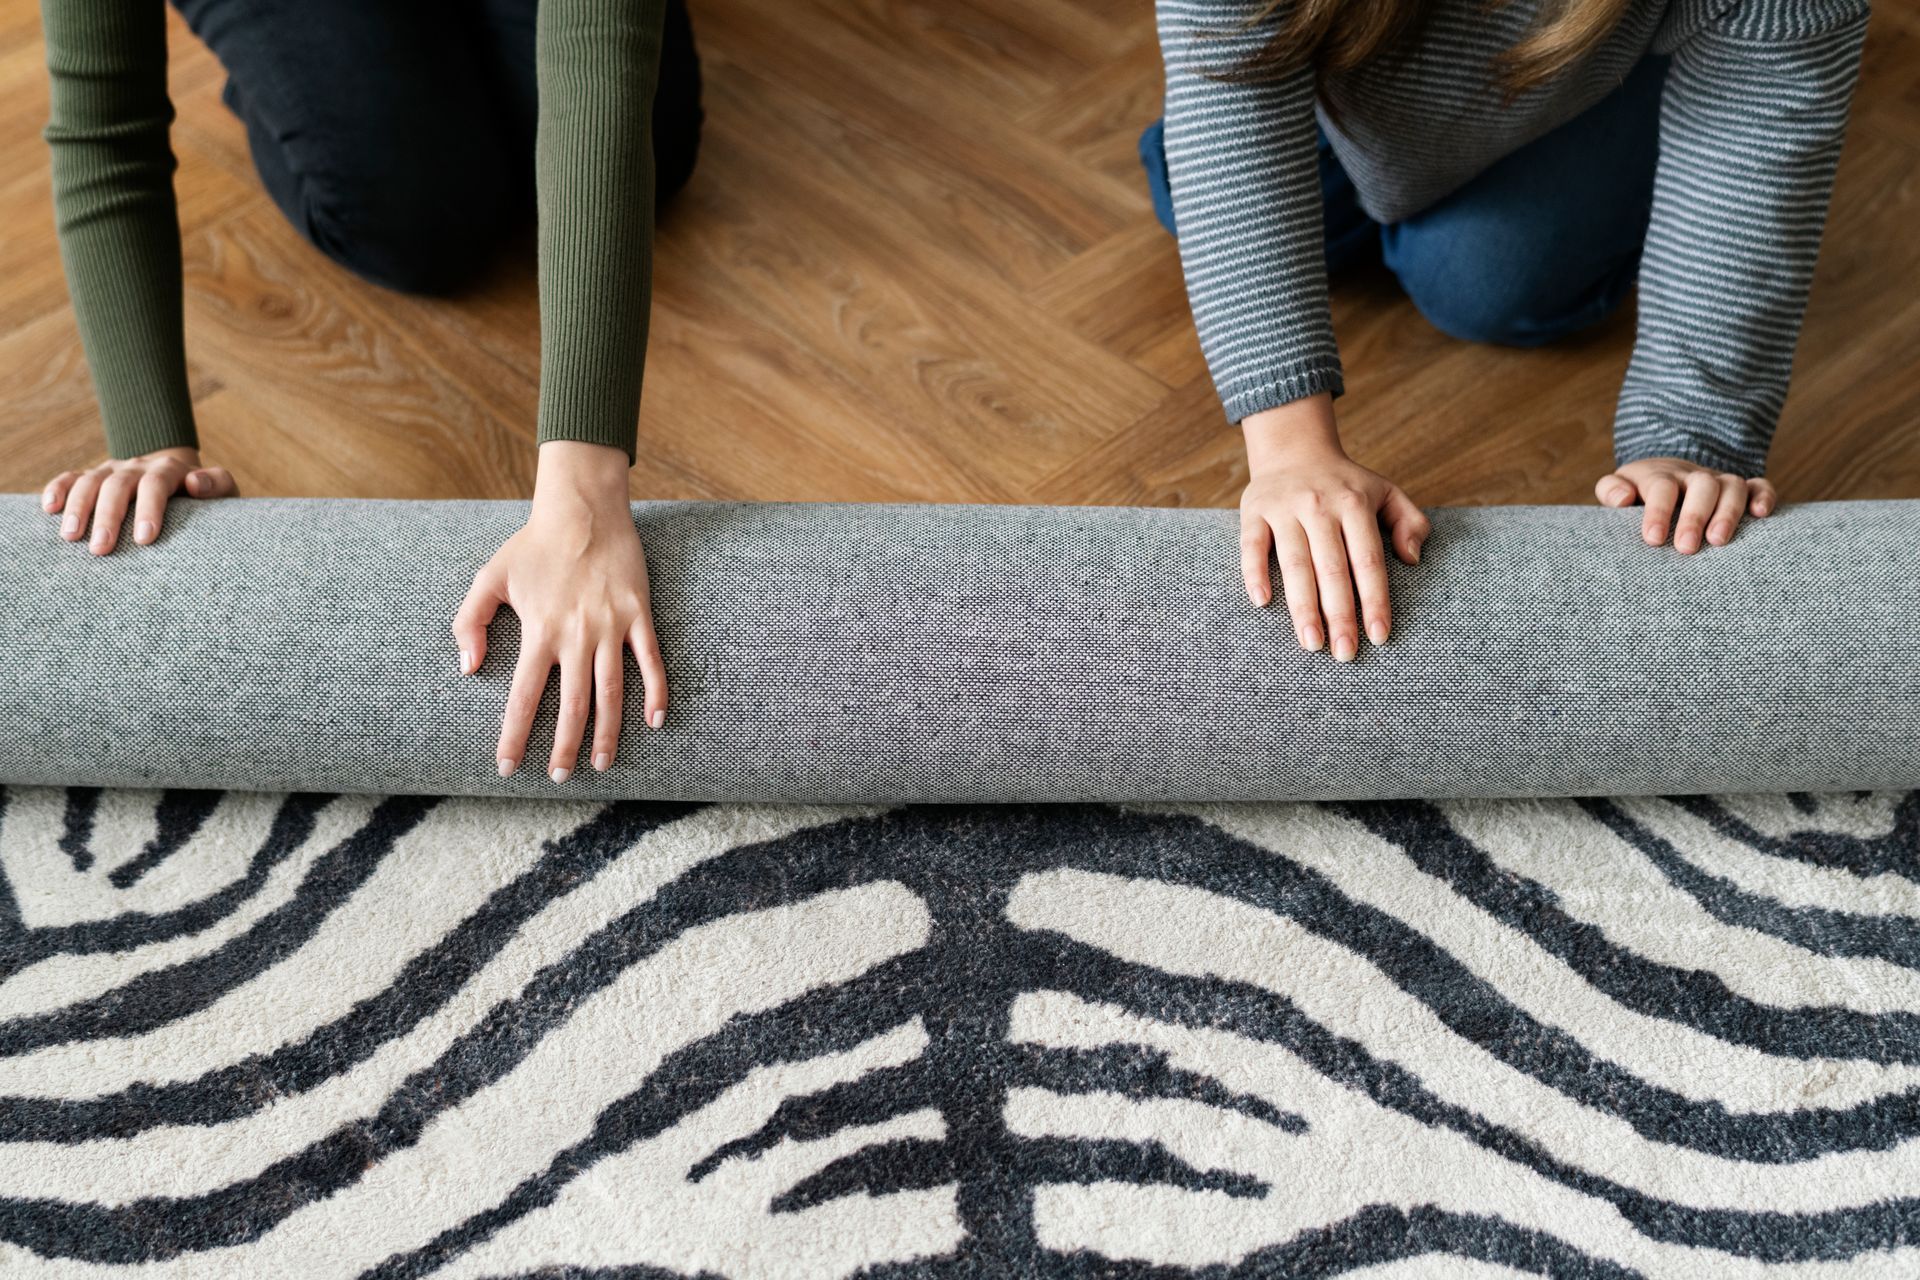 Two women are rolling a rug with a zebra print